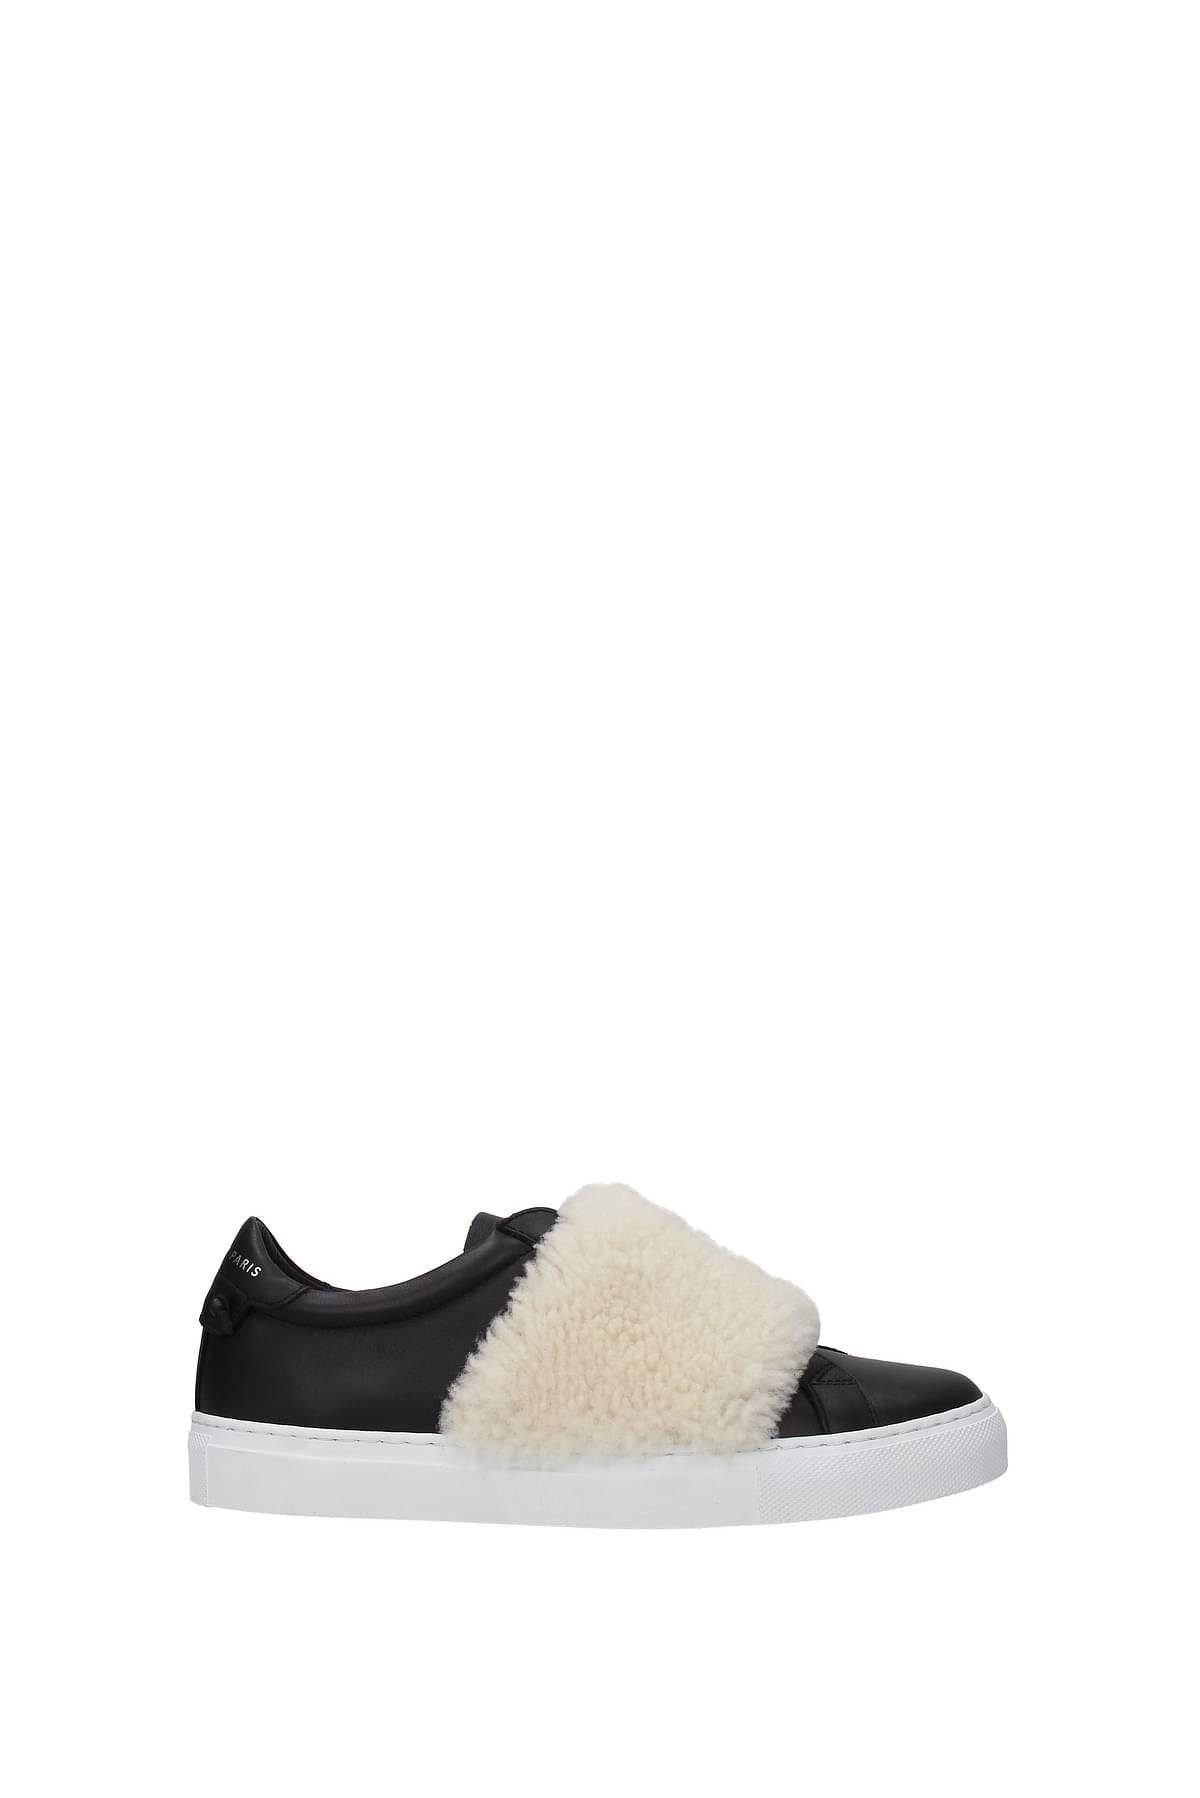 Givenchy Sneakers urban street Women BE0005E17X015 Leather 269,5€